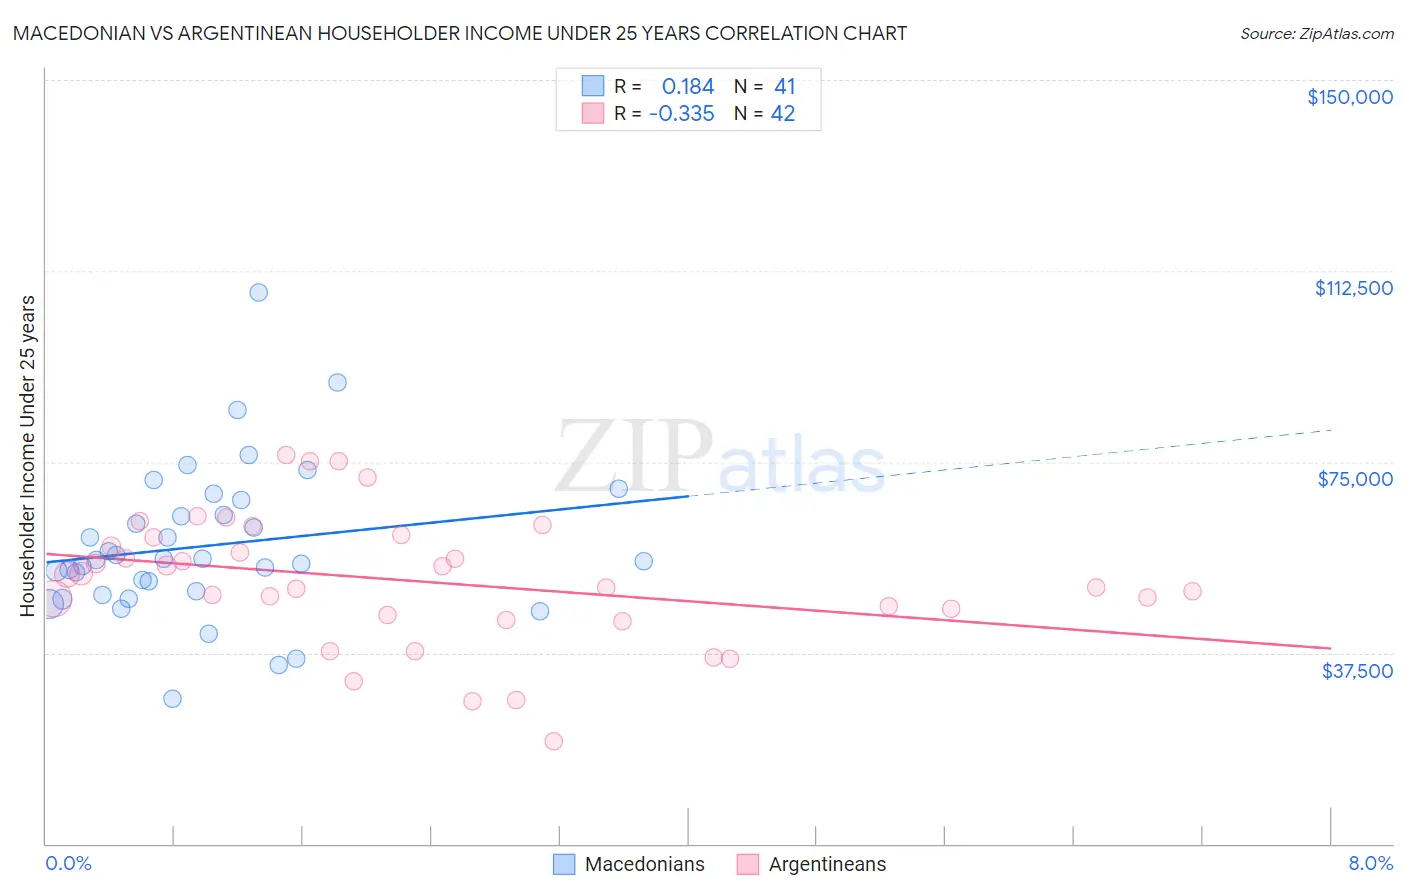 Macedonian vs Argentinean Householder Income Under 25 years